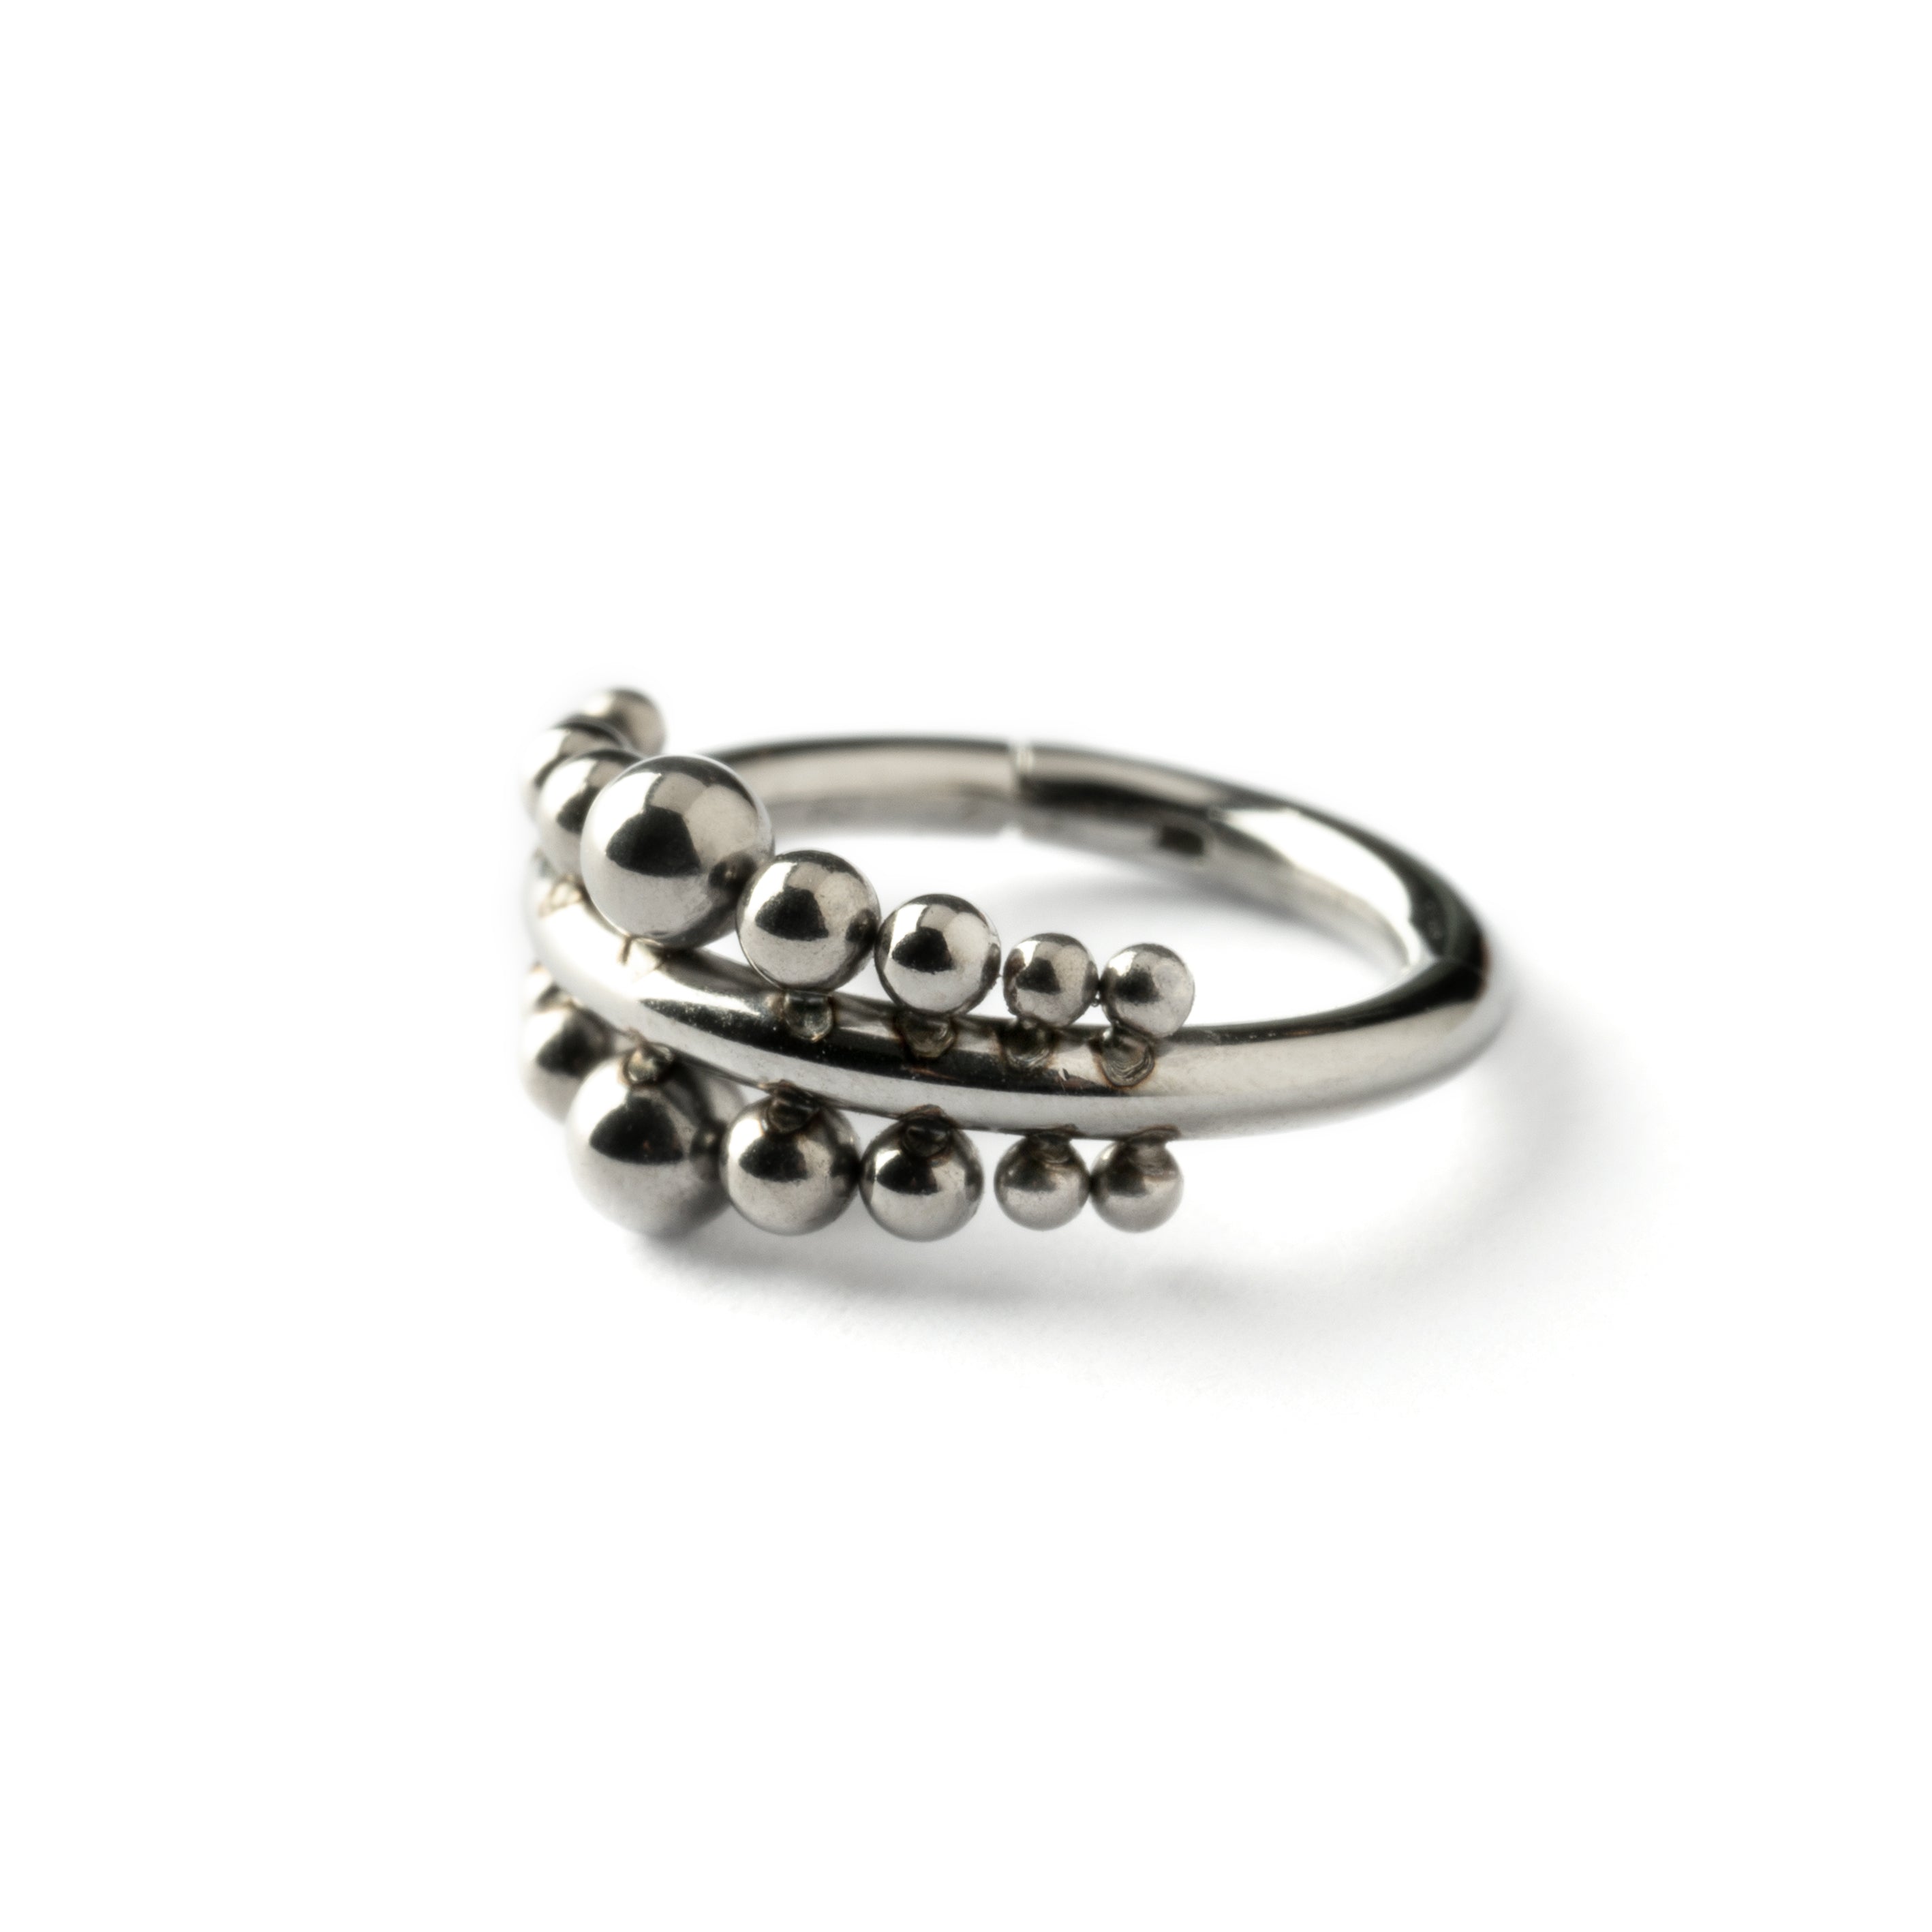 Somsak boho tribal surgical steel clicker piercing ring right side view